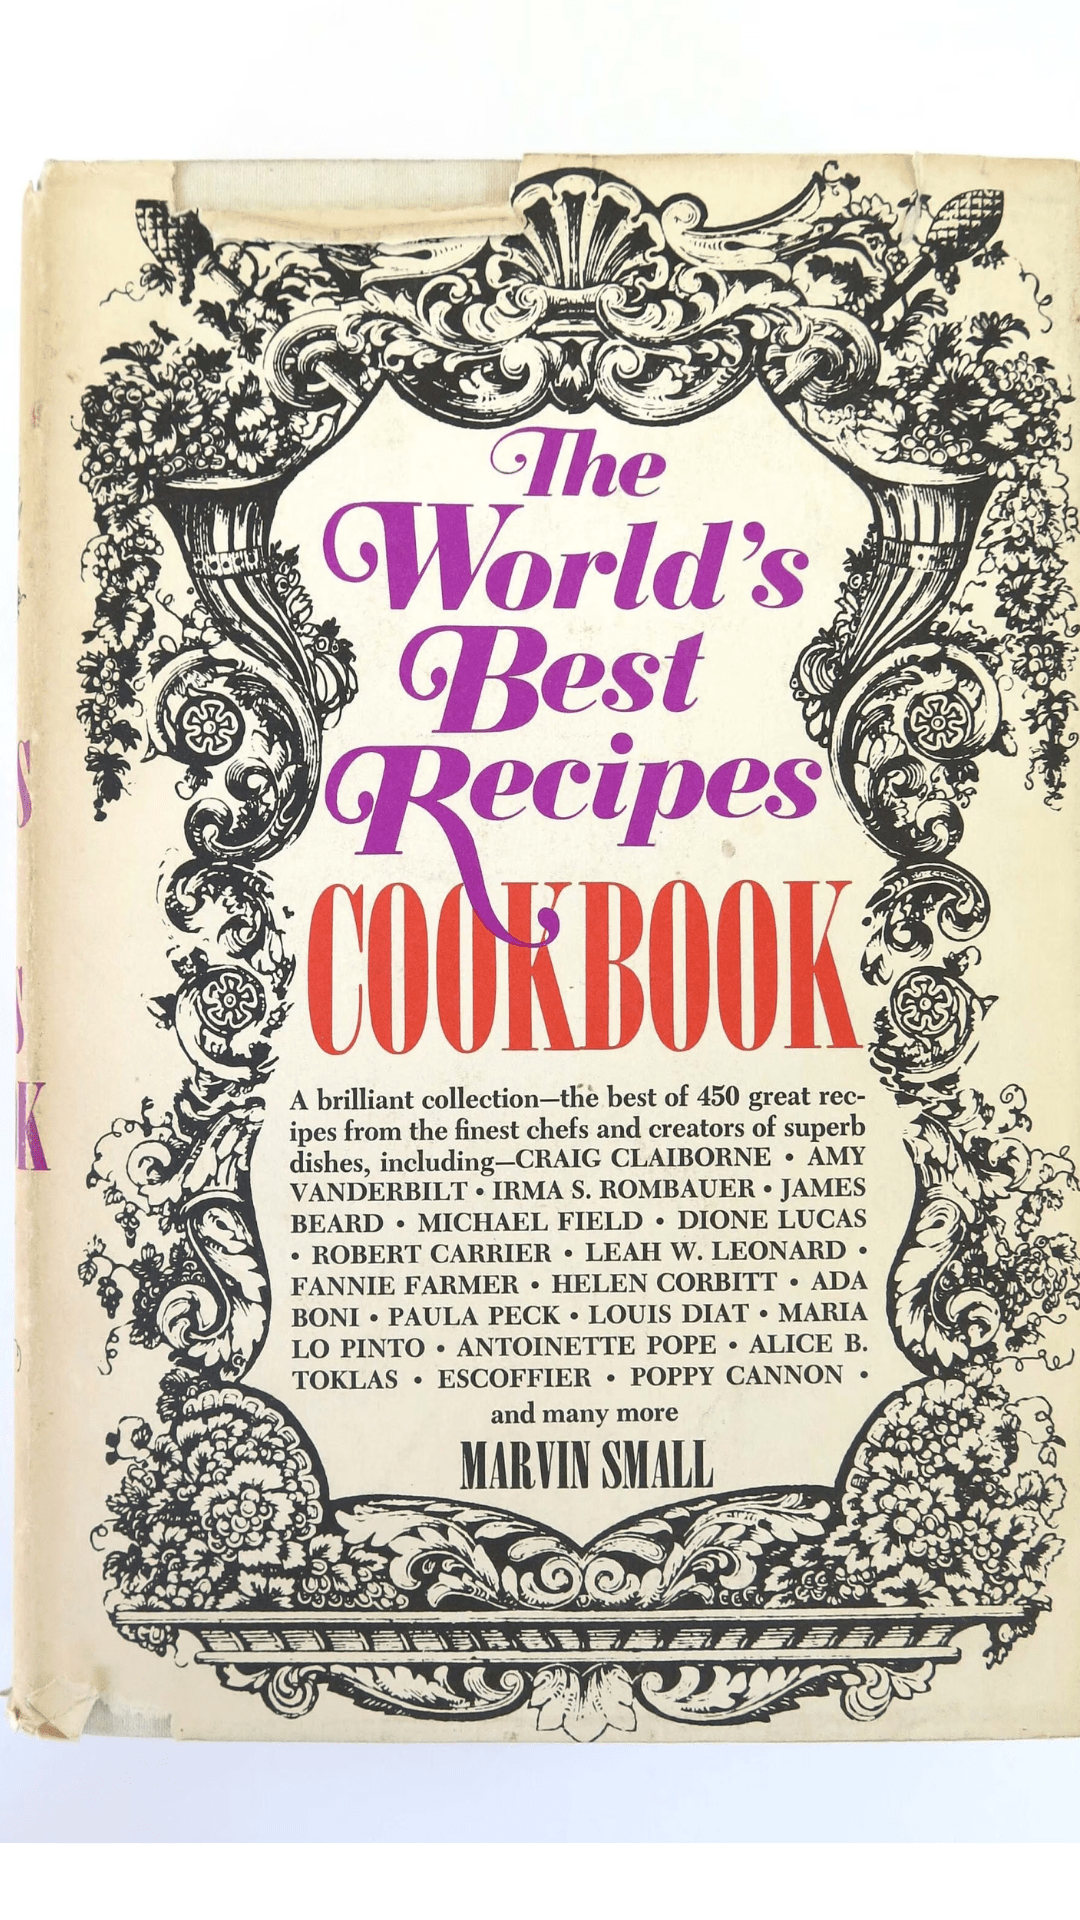 The World's Best Recipes